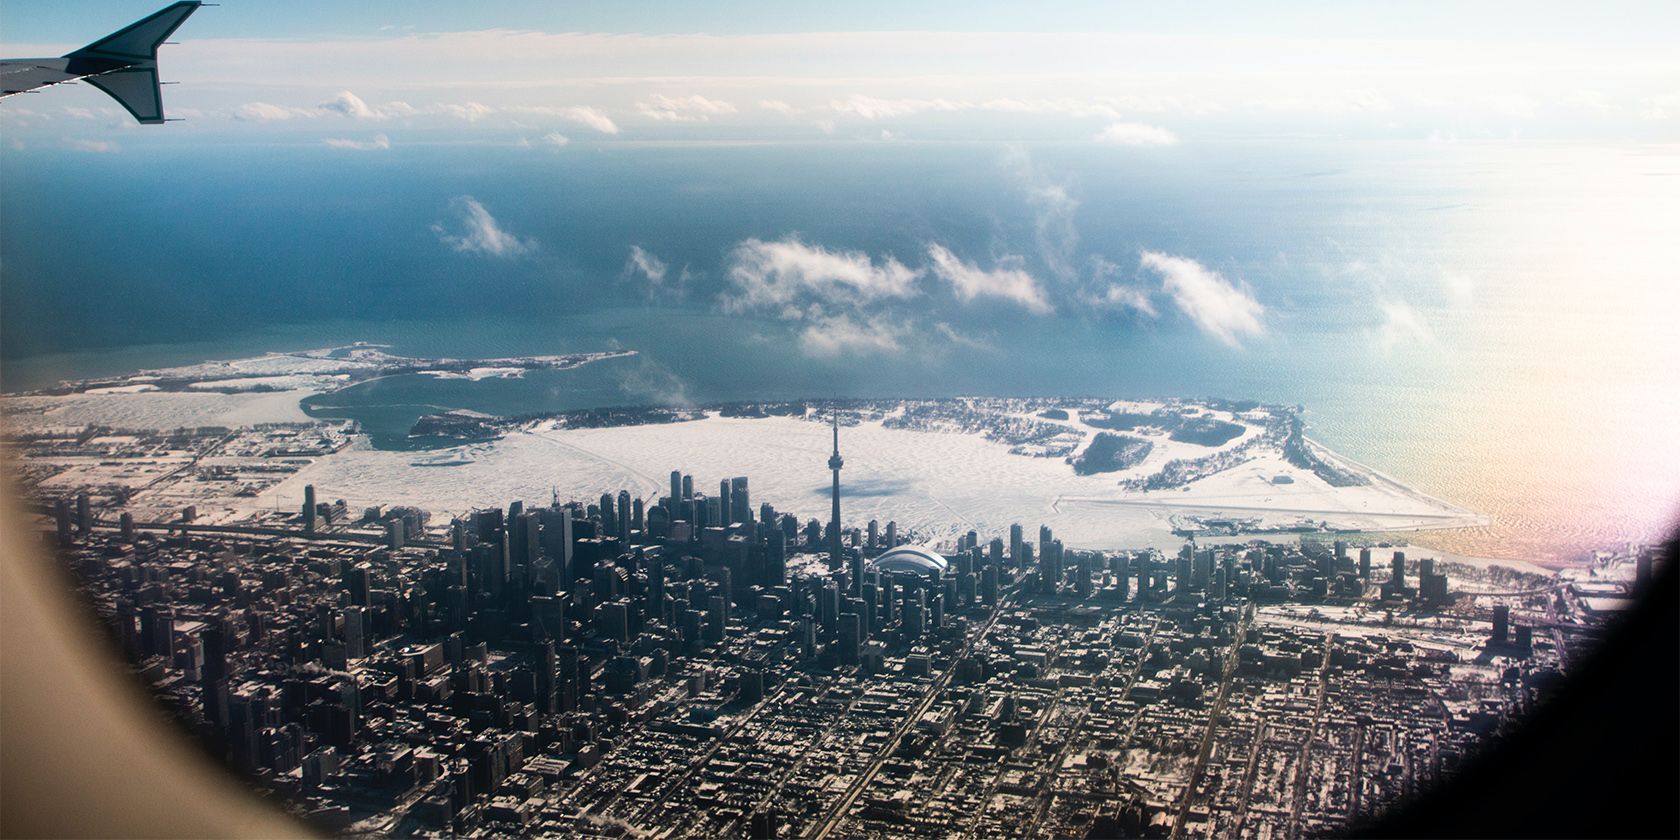 Photo taken from a plane of the Toronto skyline